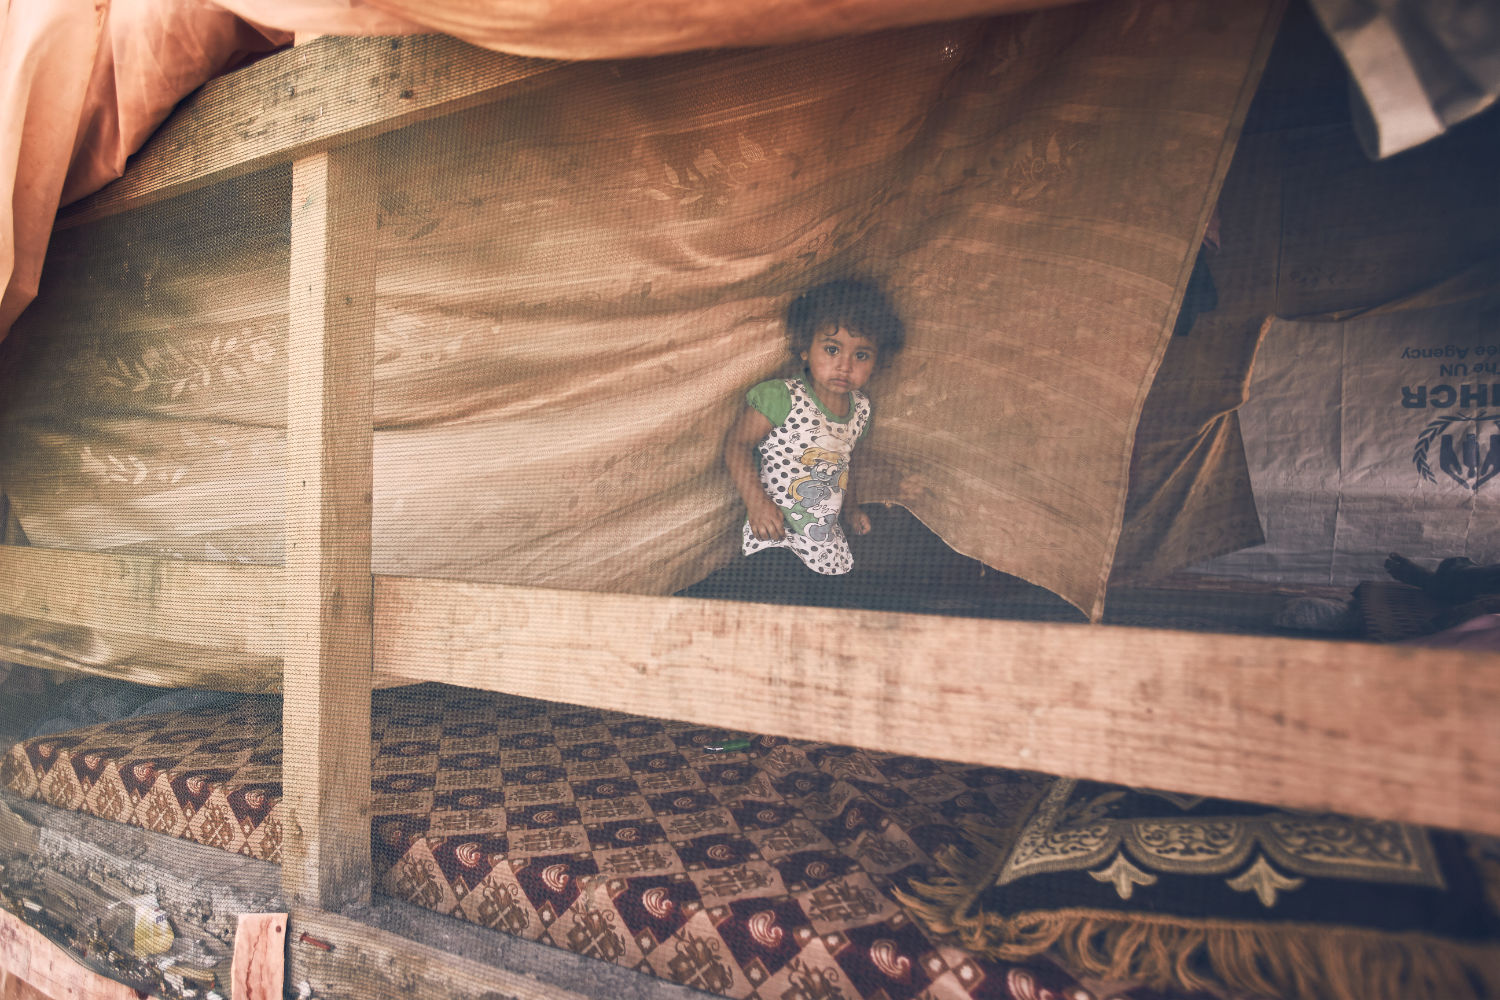 A child in a refugee camp in Lebanon